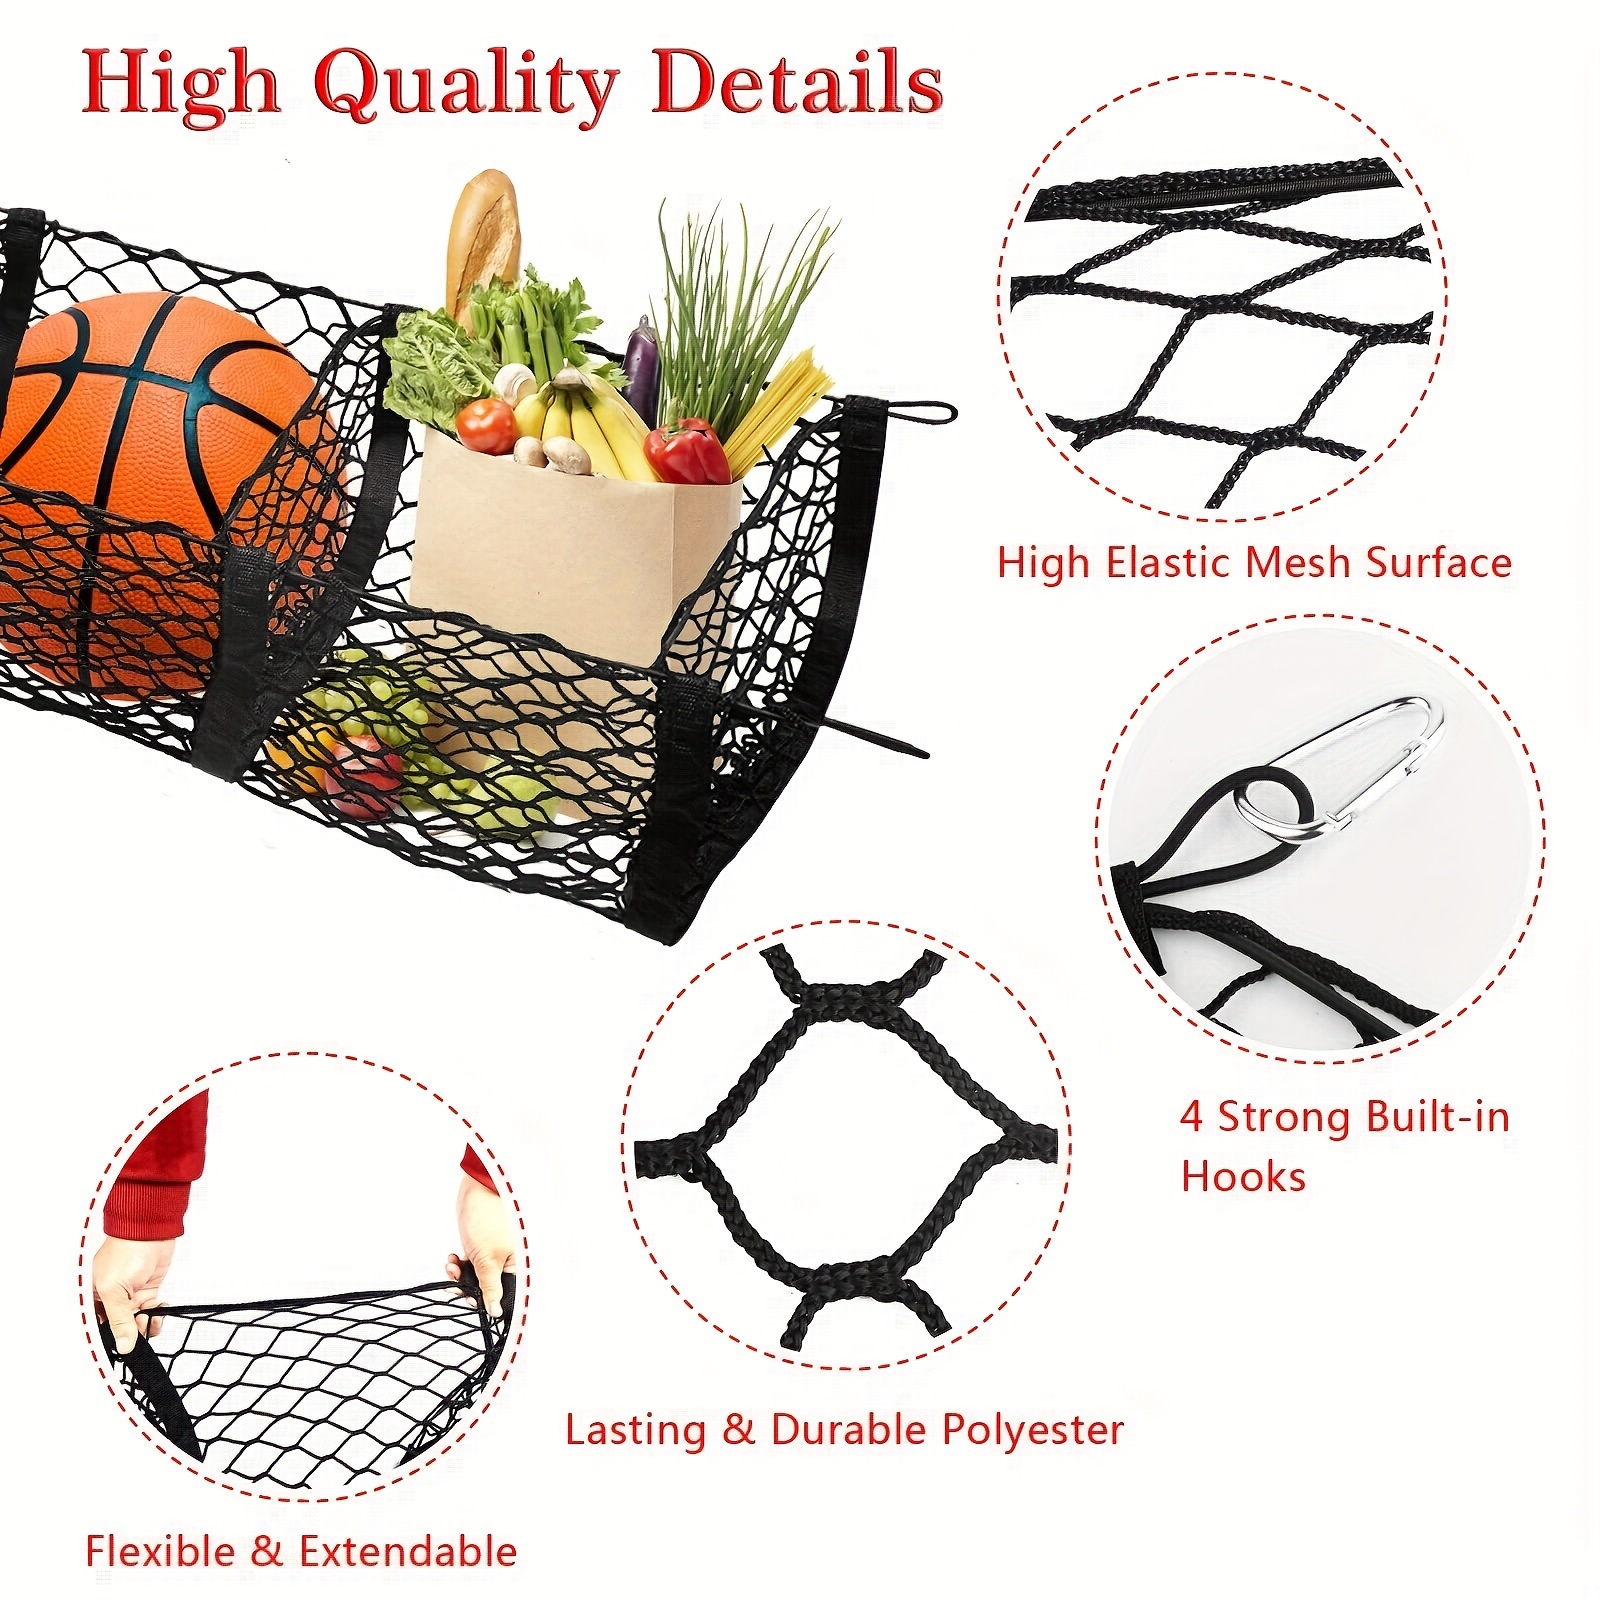 Cargo Net Trunk Bed Organizer,Mesh Storage Net with 4 Metal Hooks,43.3×11.8  inch Heavy Duty Cargo Net for SUV,Car,Toyota,Pickup Truck Bed,Truck Bed  Grocery Holder 